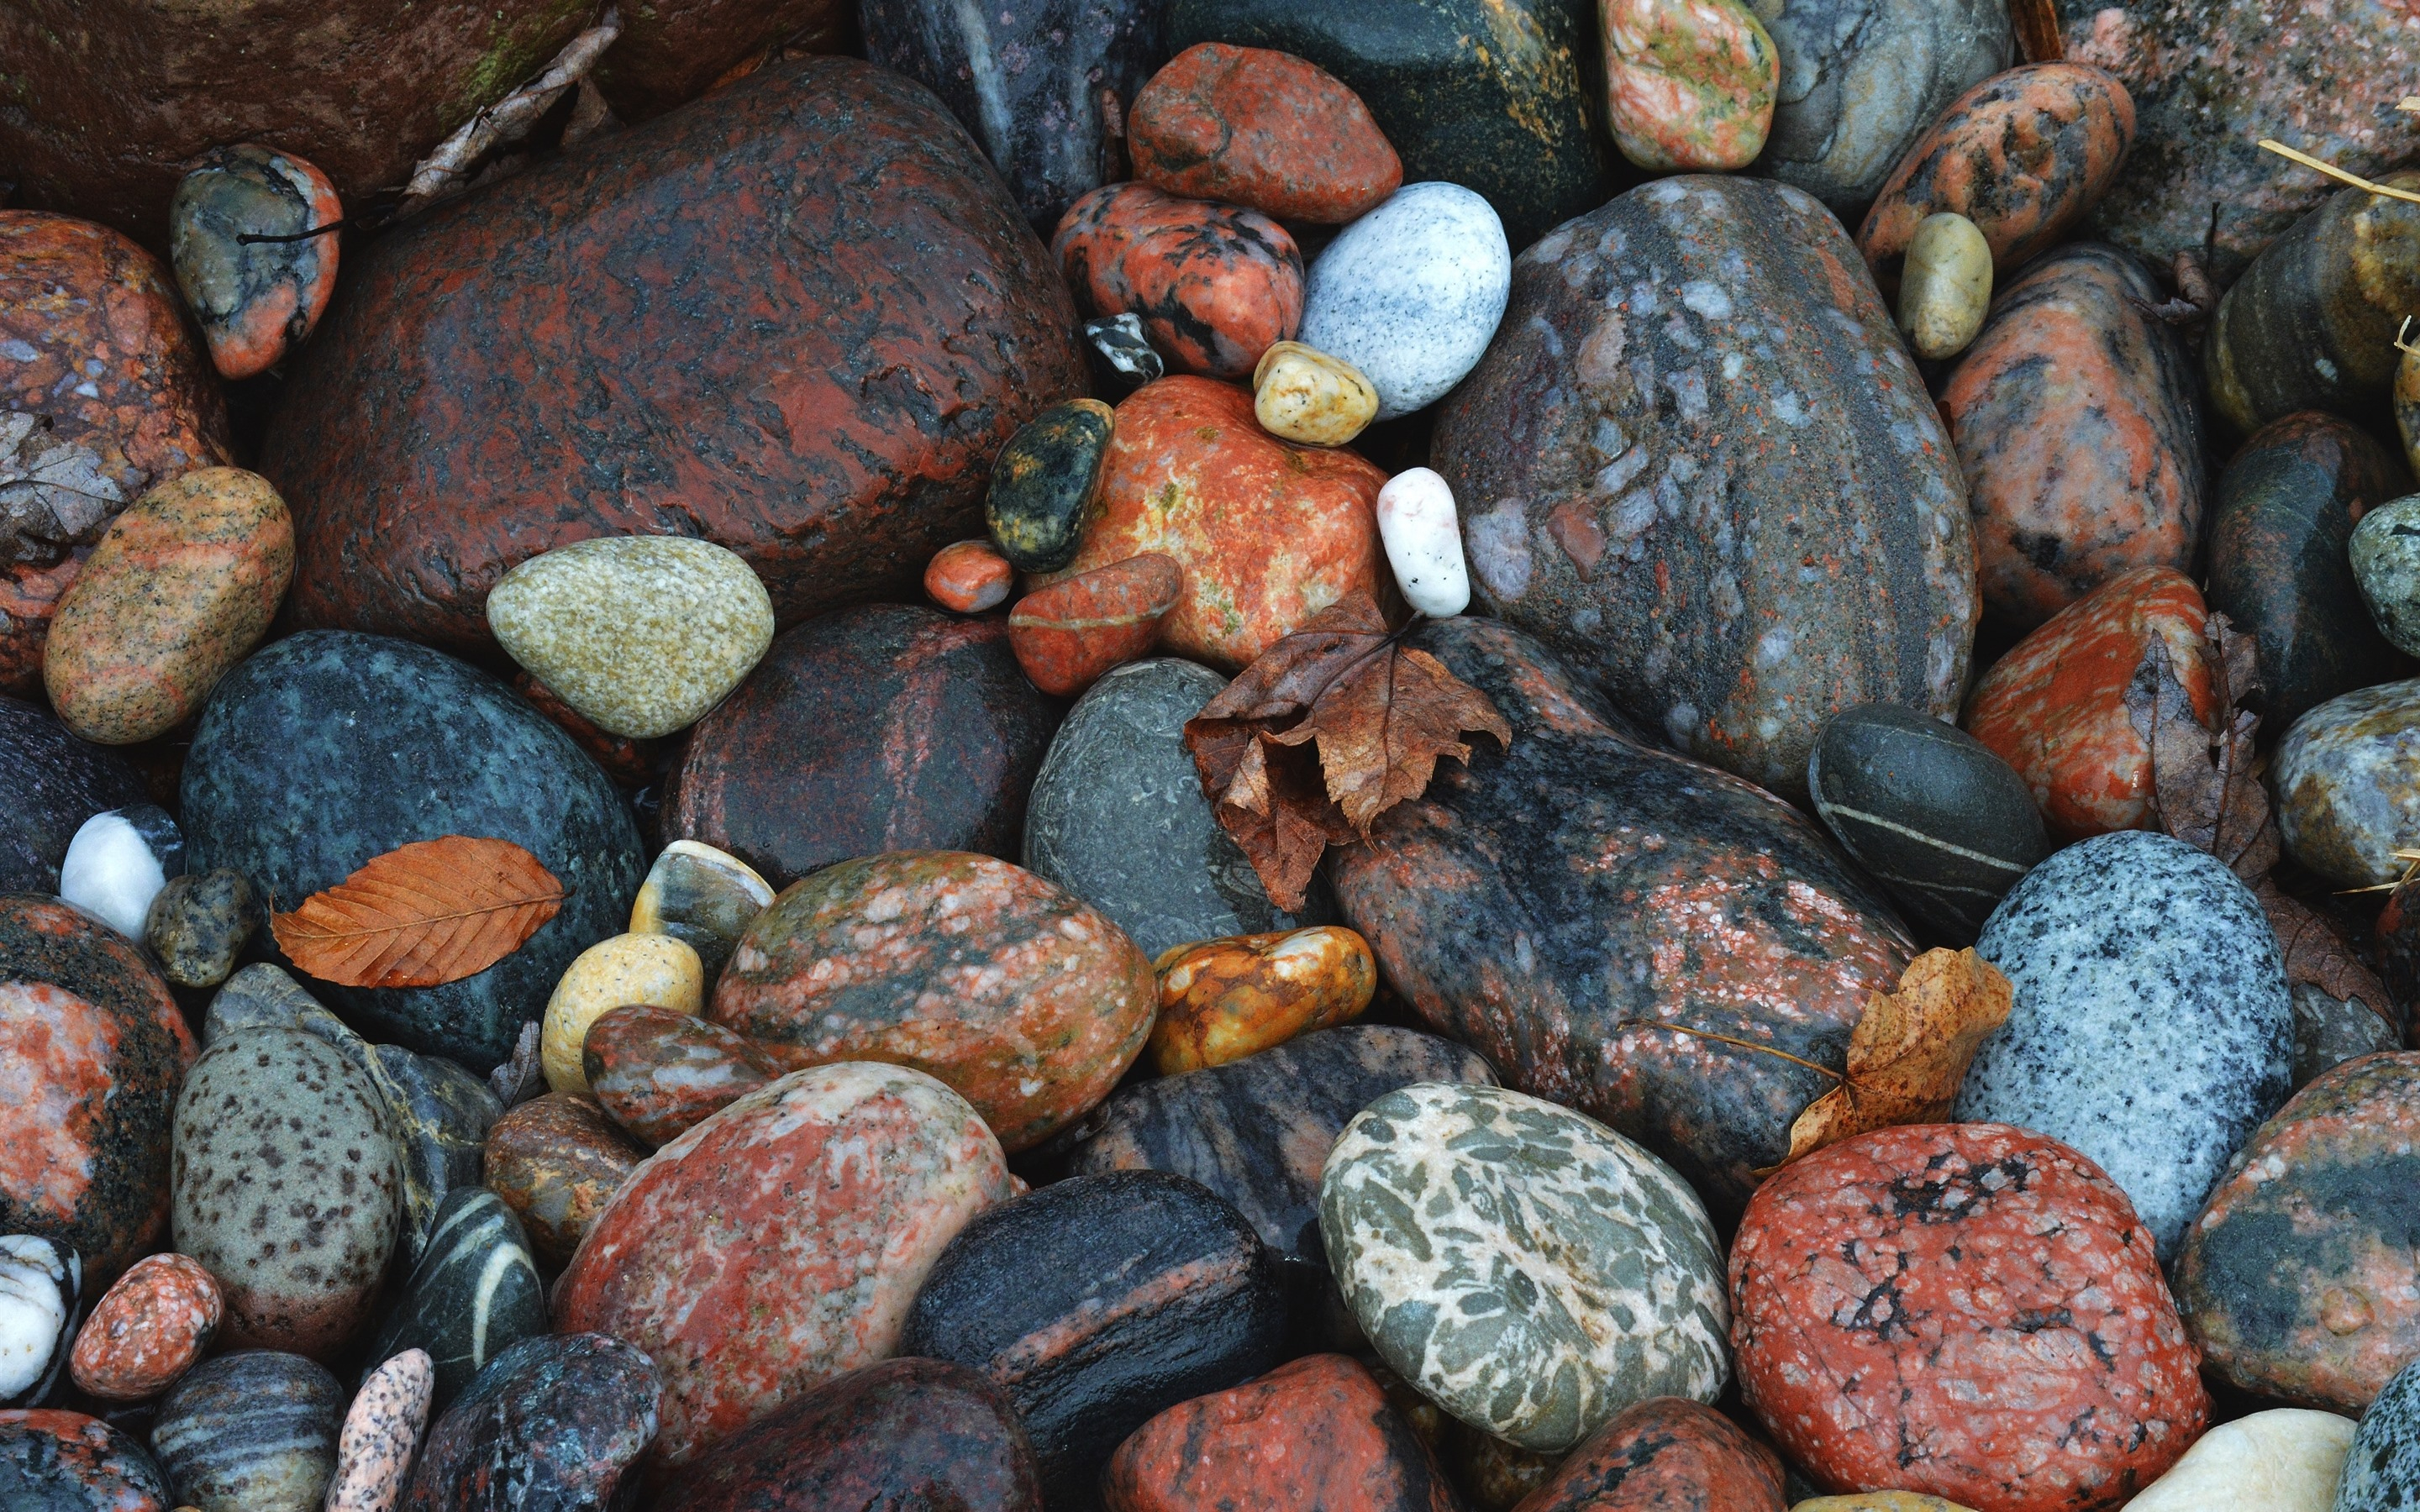 Multicolored patterned pebbles on the banks of rivers